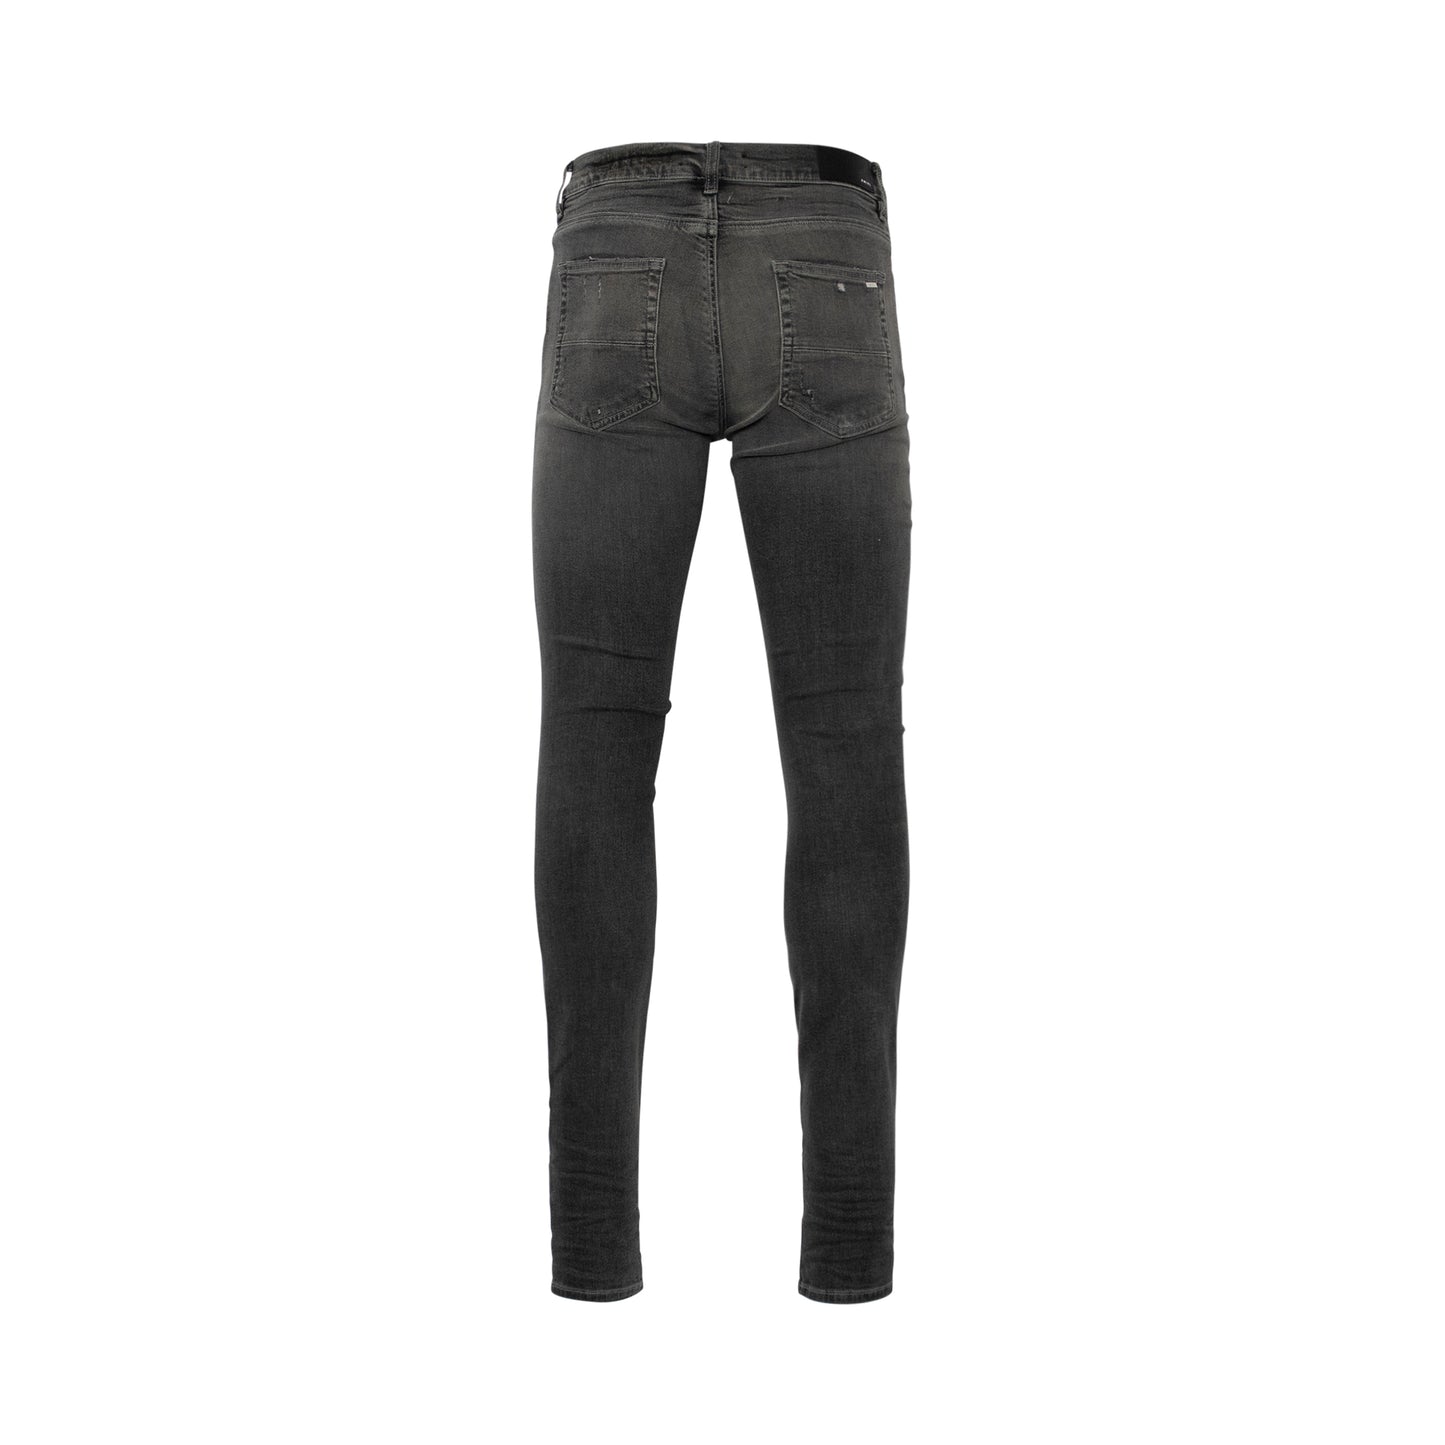 Mx1 Suede Jeans in Grey